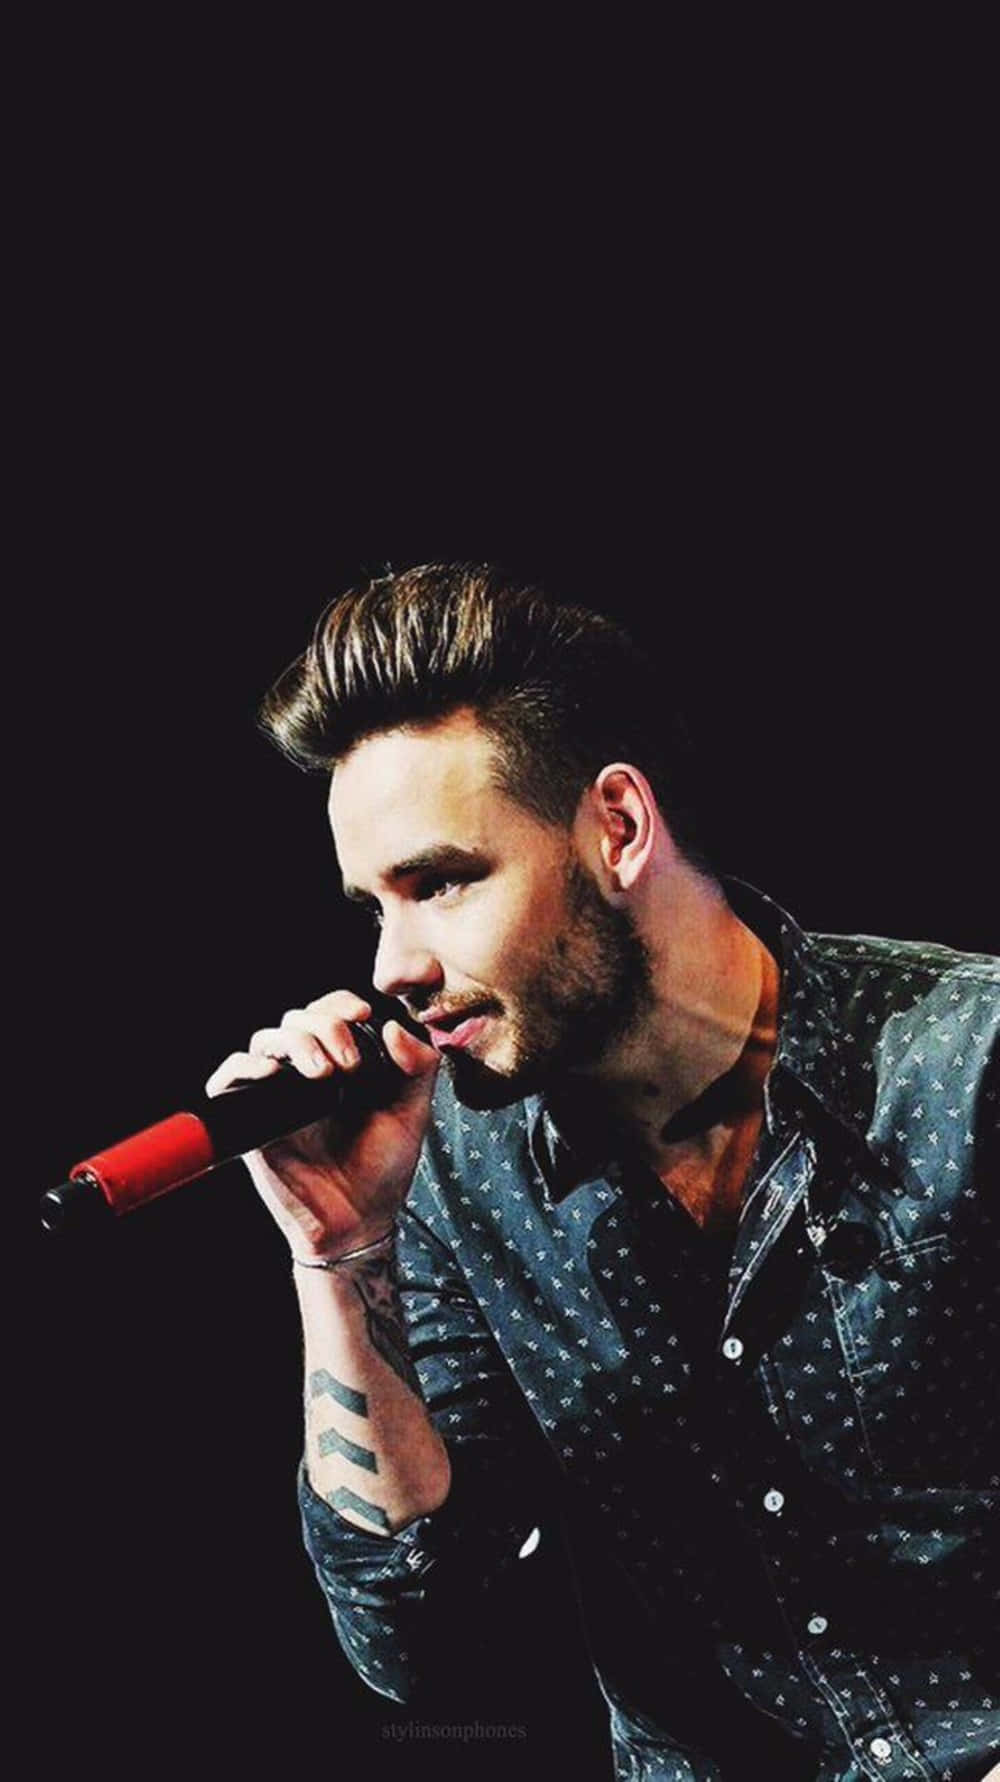 Liam Payne rocks the stage with his electrifying performance. Wallpaper